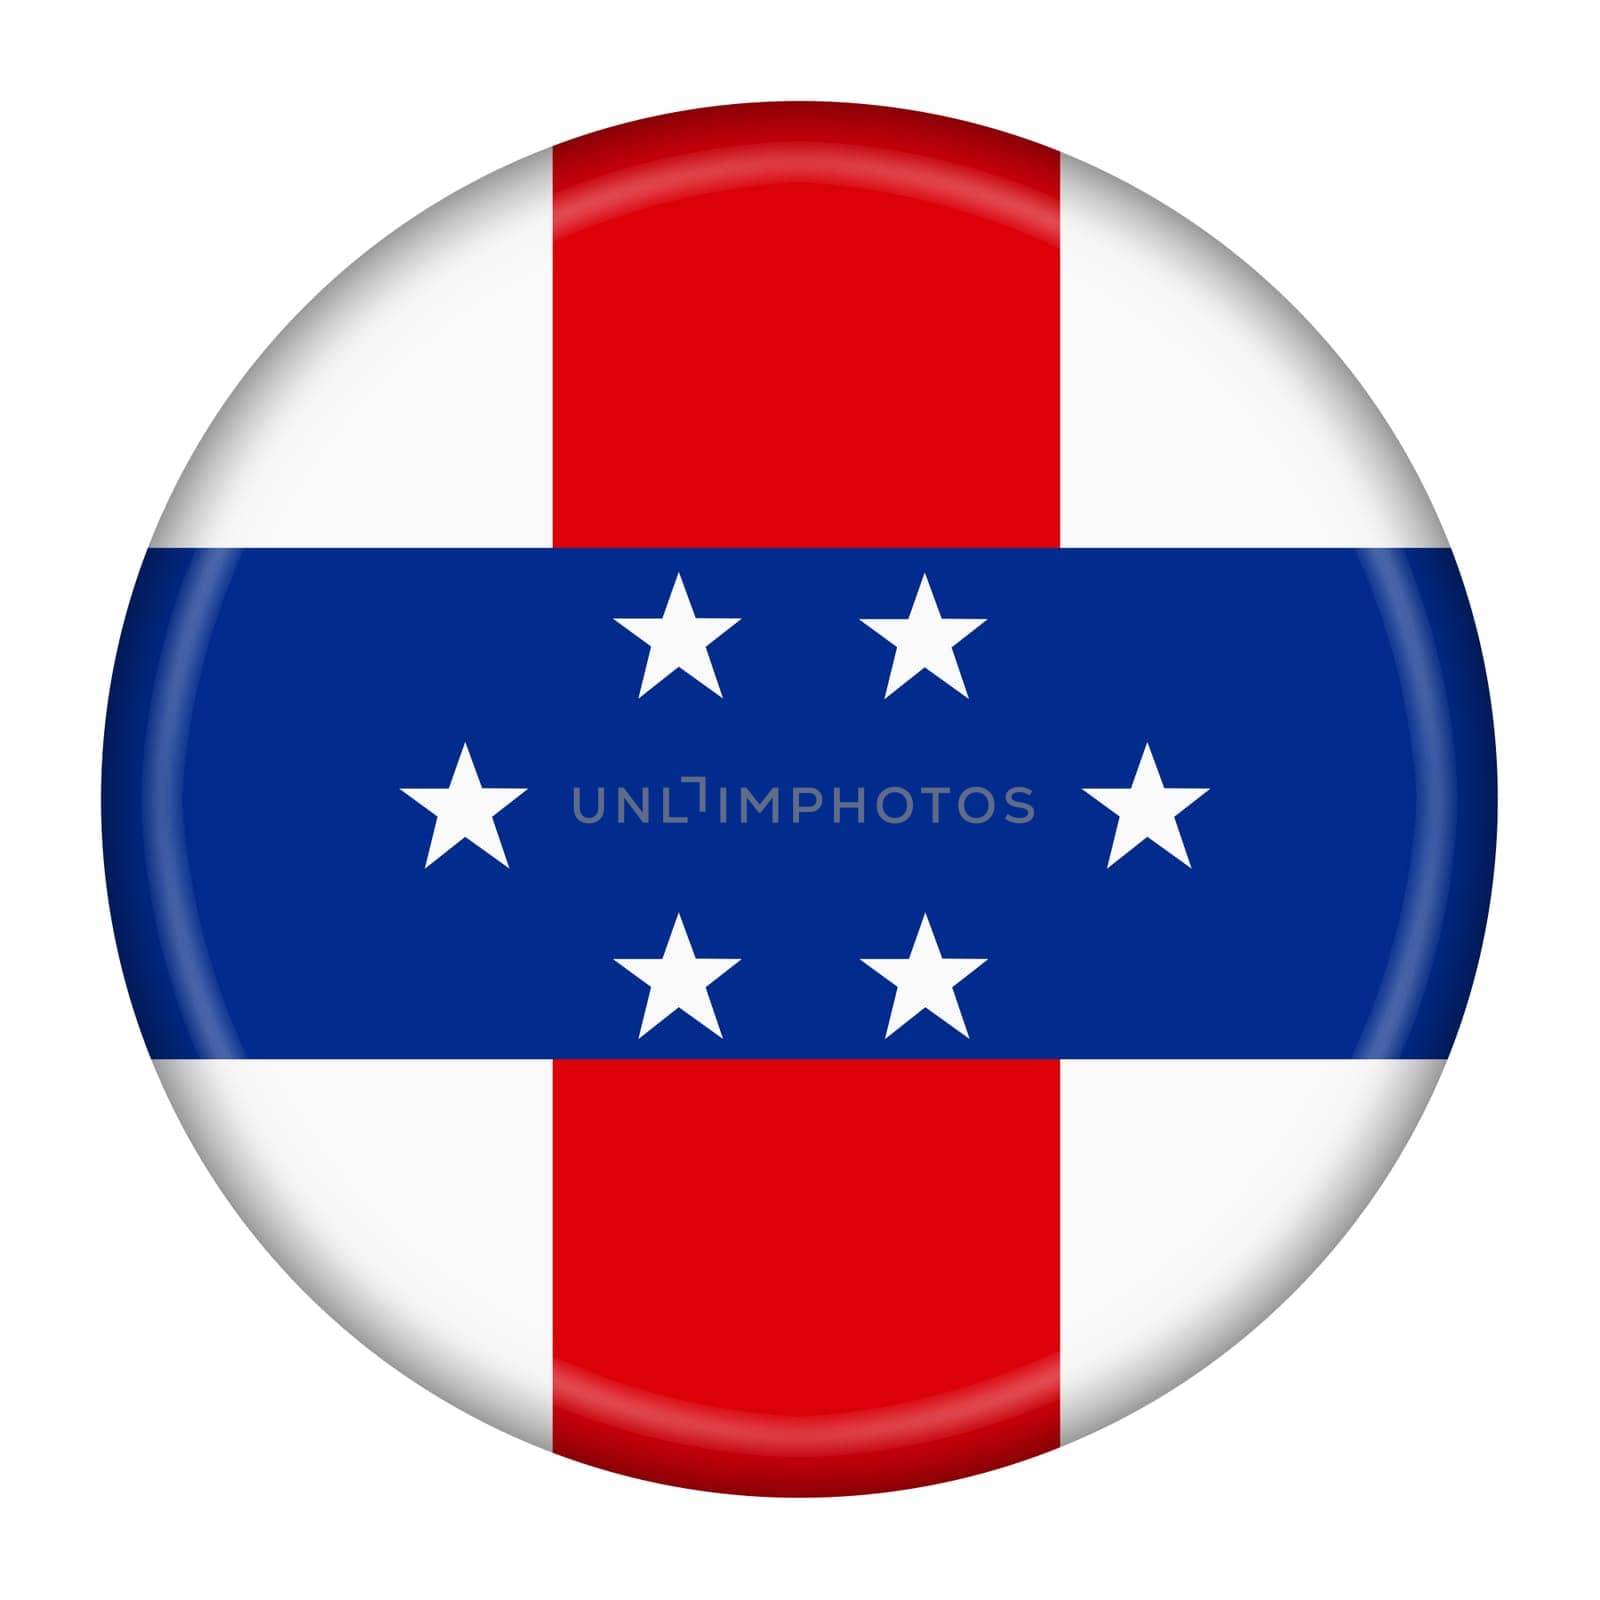 Netherlands Antilles flag button 3d illustration with clipping path by VivacityImages